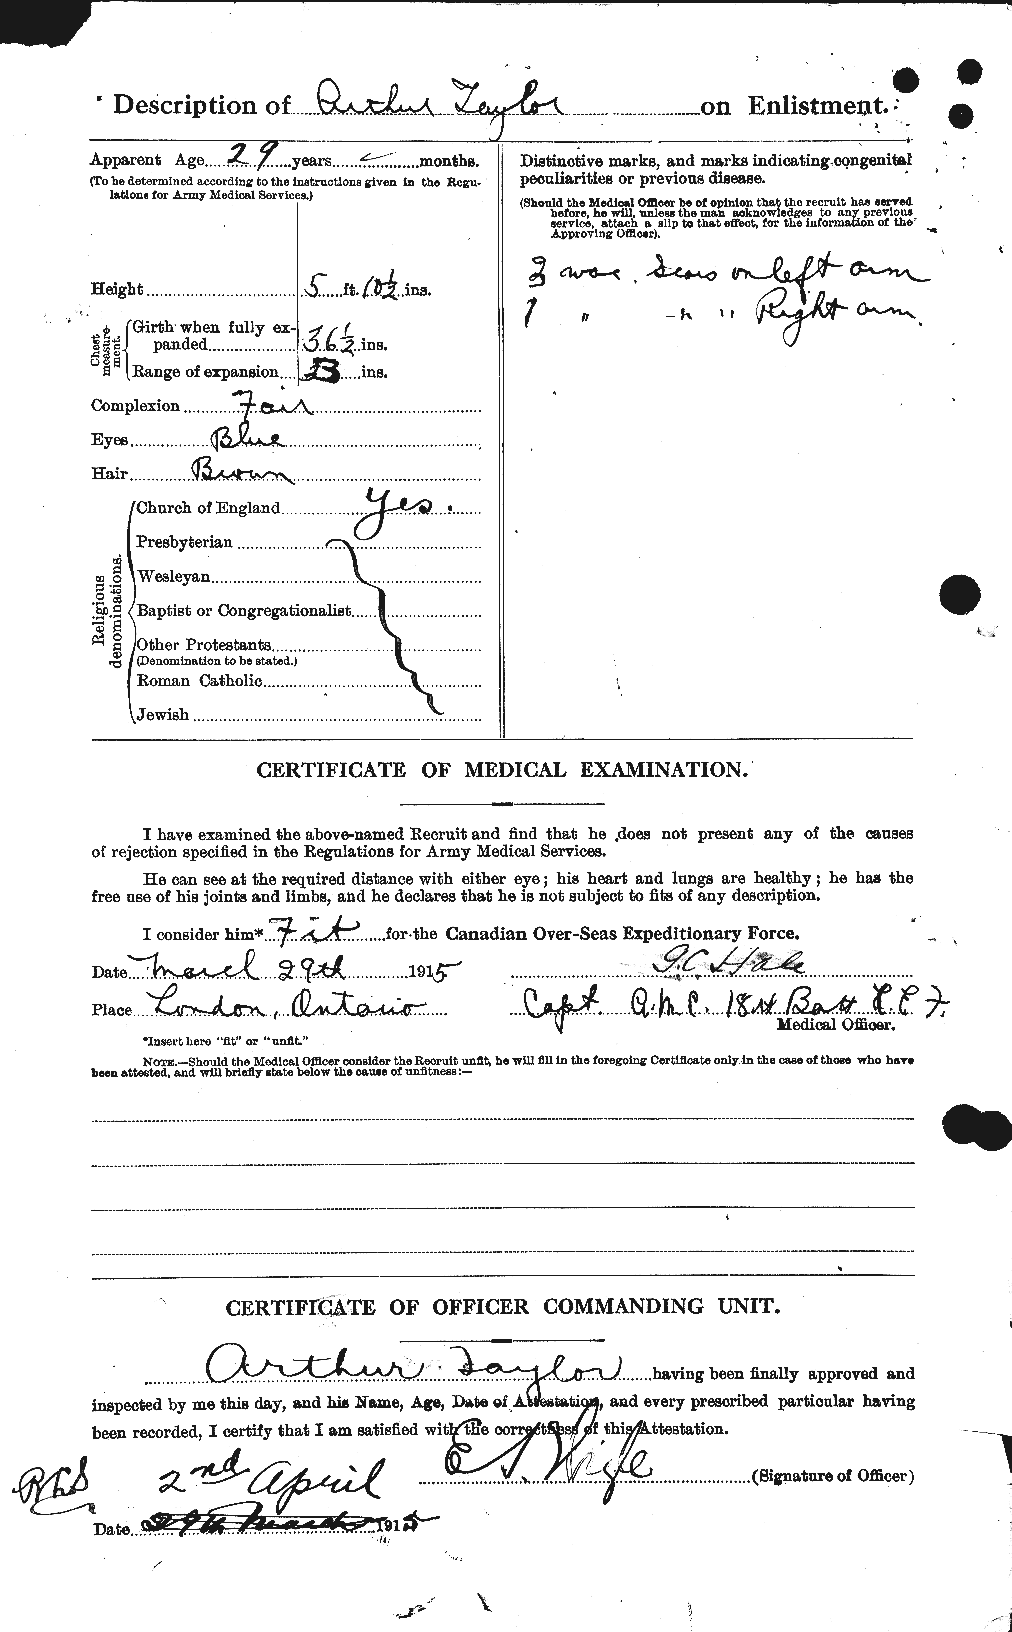 Personnel Records of the First World War - CEF 626709b